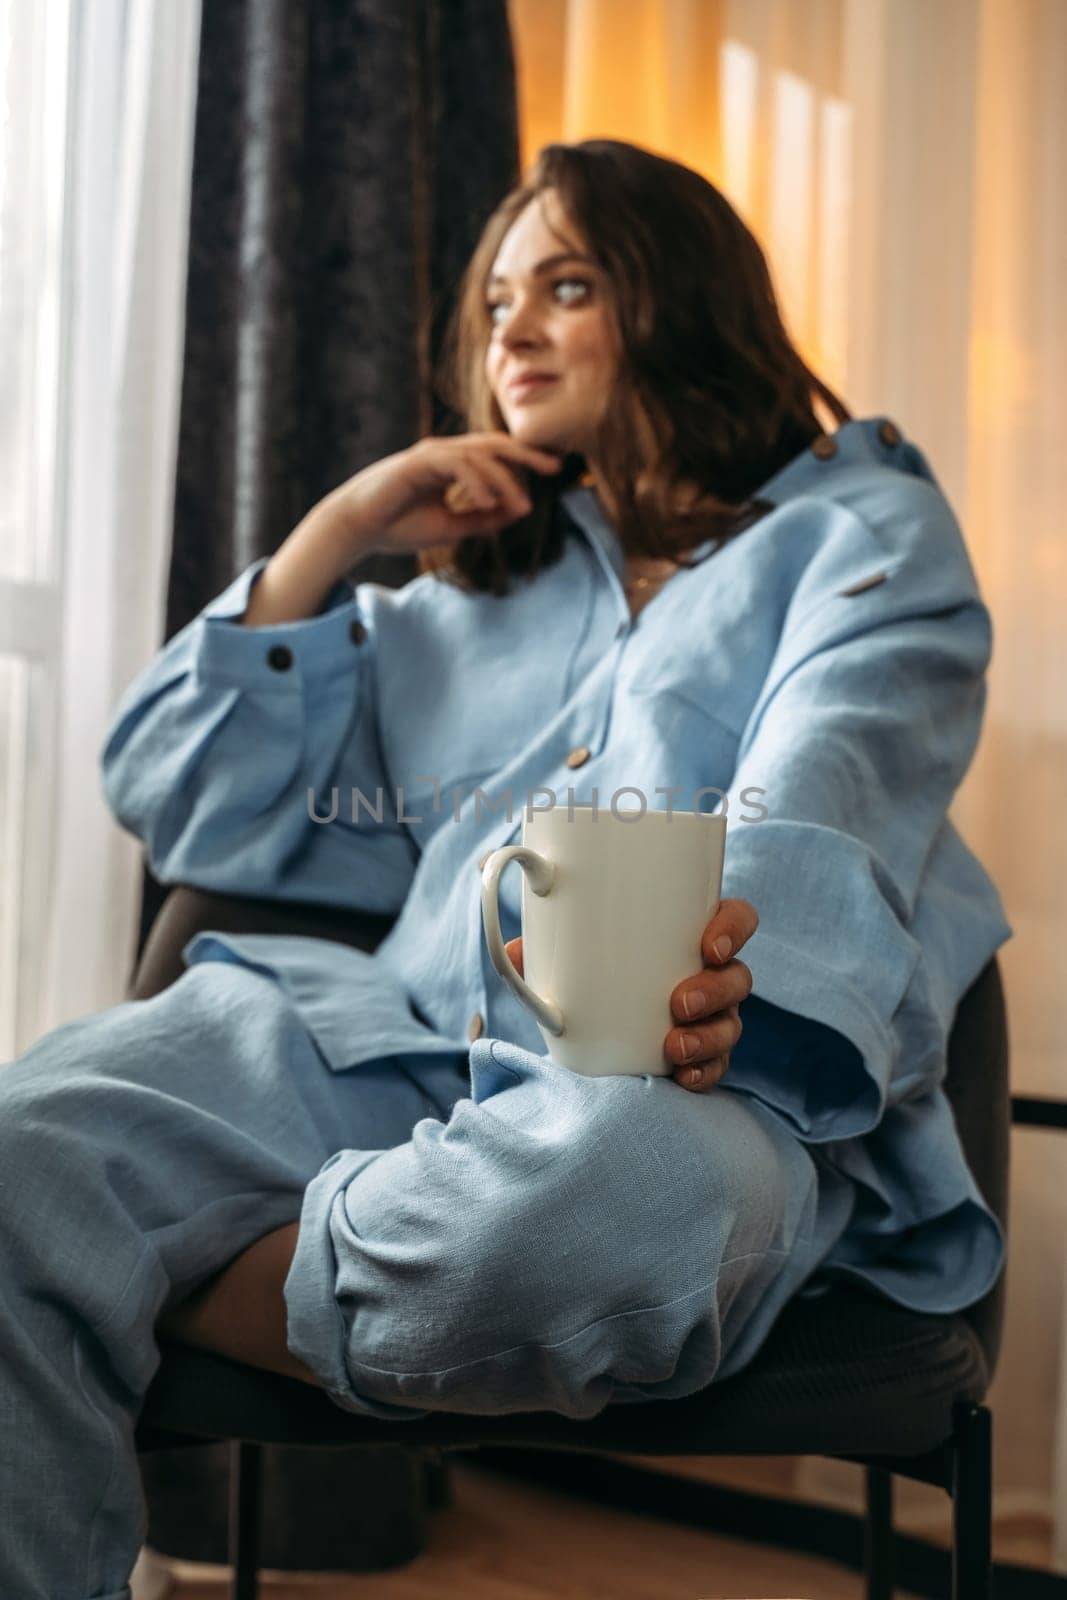 A woman has a white cup of tea or coffee on her knee. The cup is in the sharpness zone, the rest of the image is blurry. Vertical frame.